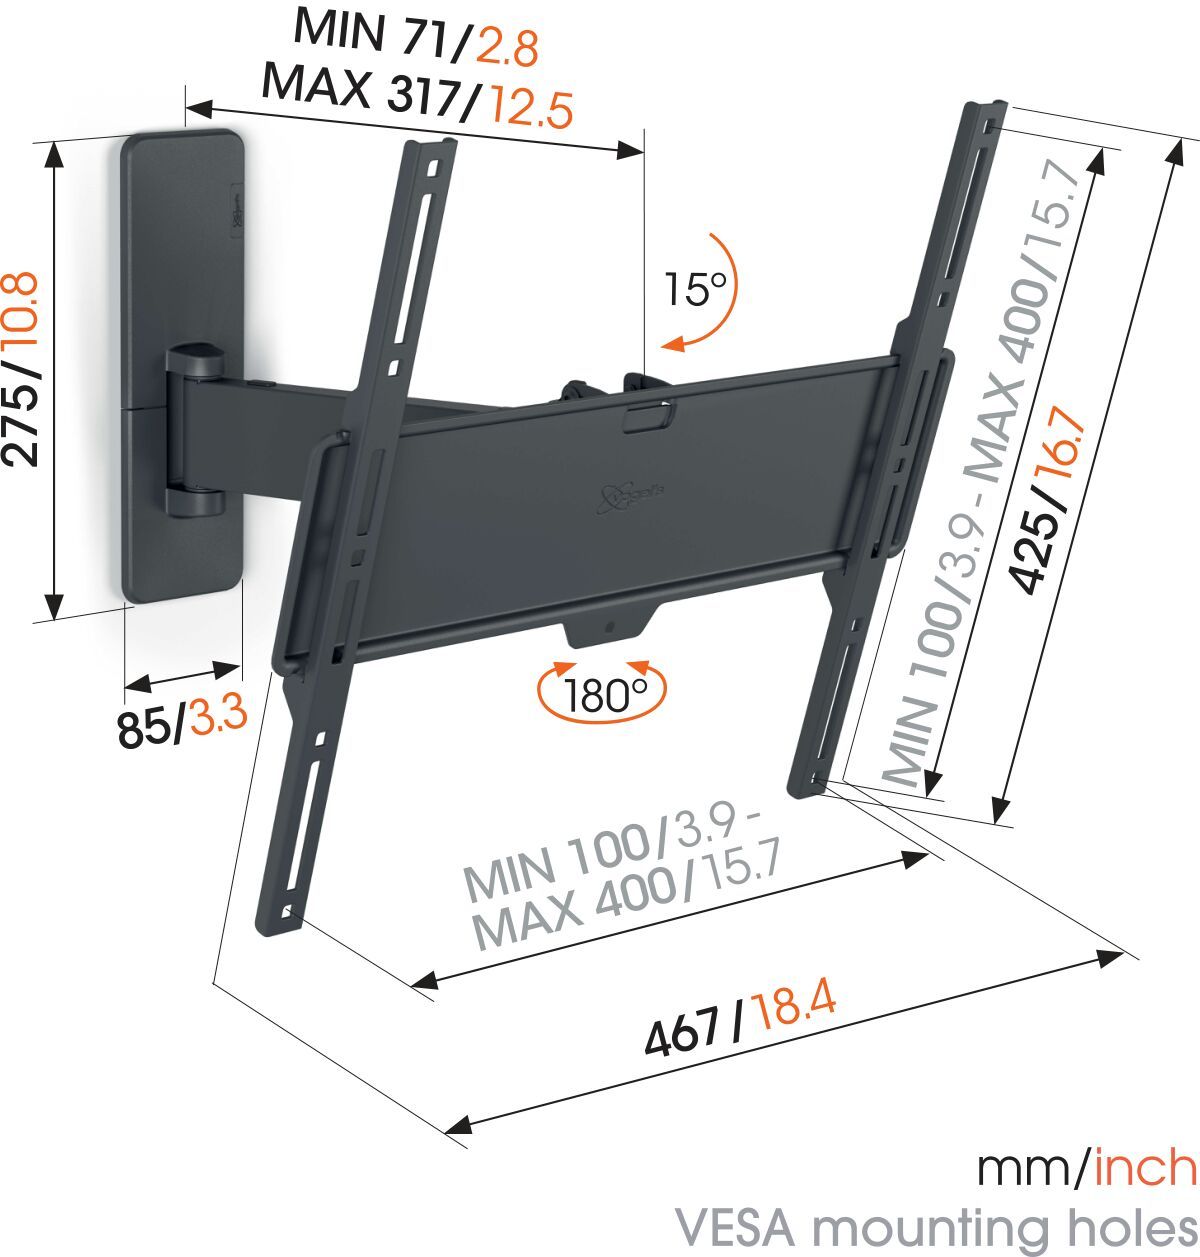 Vogel's TVM 1425 Full-Motion TV Wall Mount - Suitable for 32 up to 65 inch TVs - Motion (up to 120°) swivel - Tilt up to 15° - Dimensions